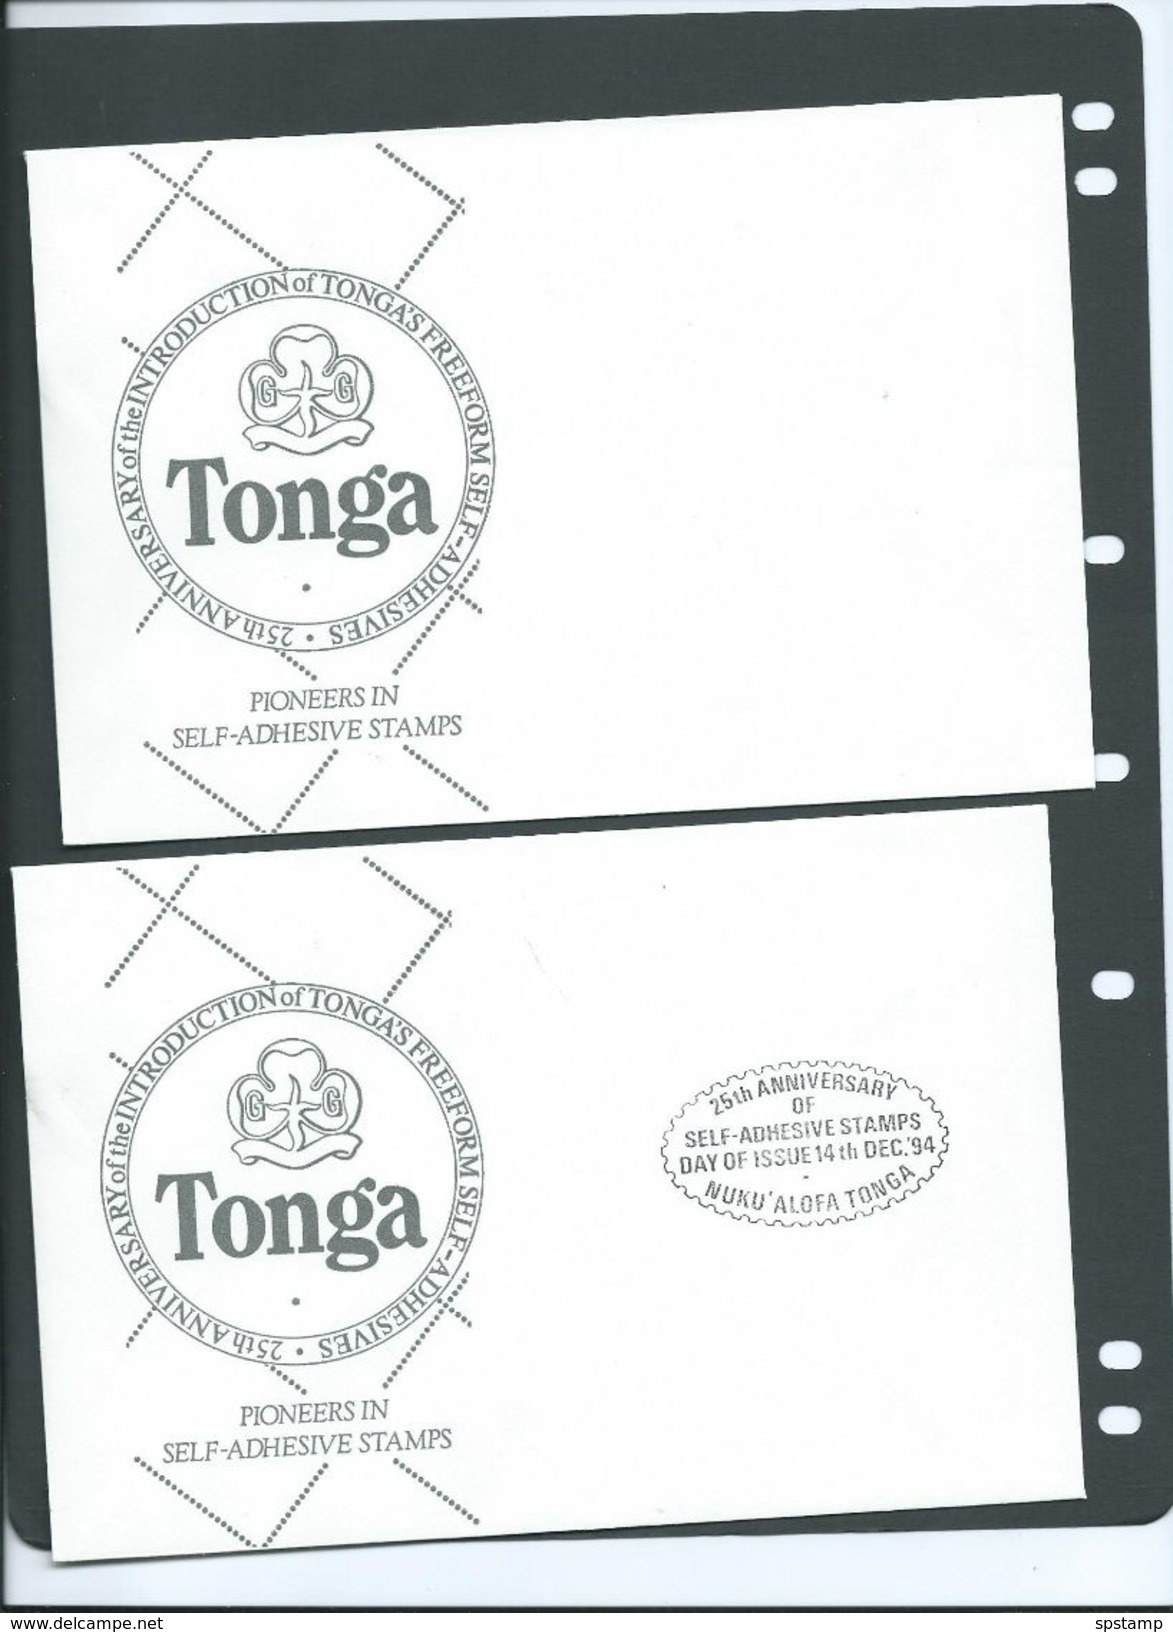 Tonga 1994 Prestige Booklet Fantastic lot of Proofs and printer material for Booklet and FDC